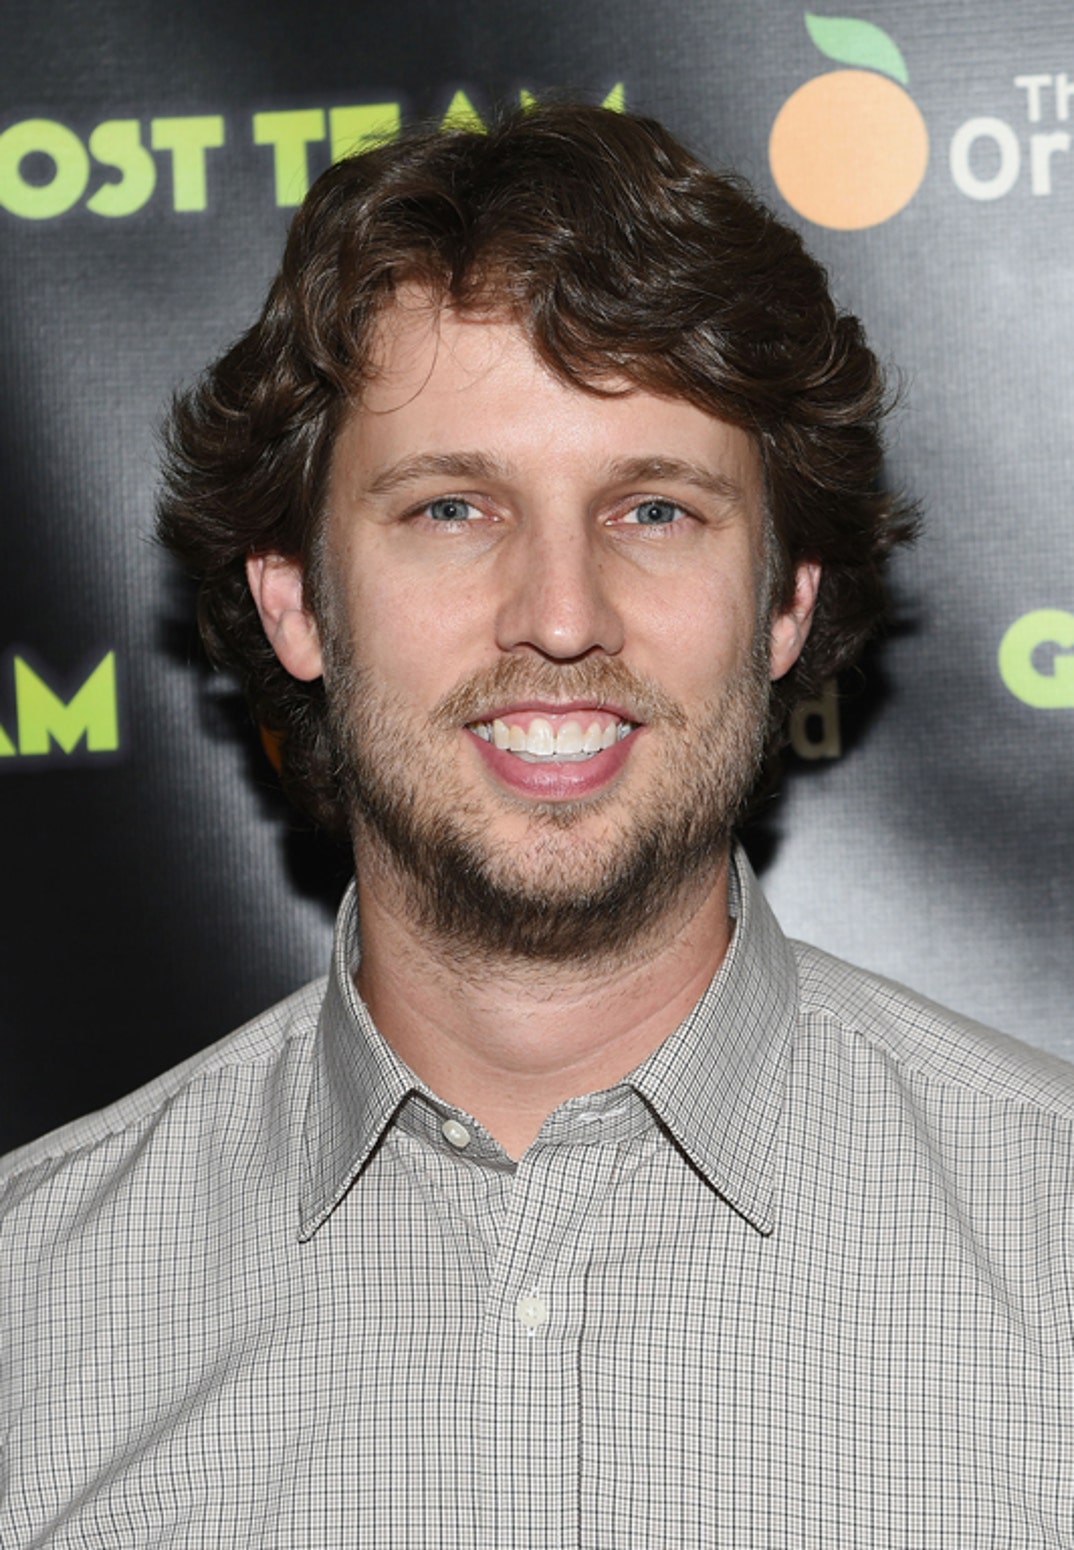 Jon Heder is now 39 years old.